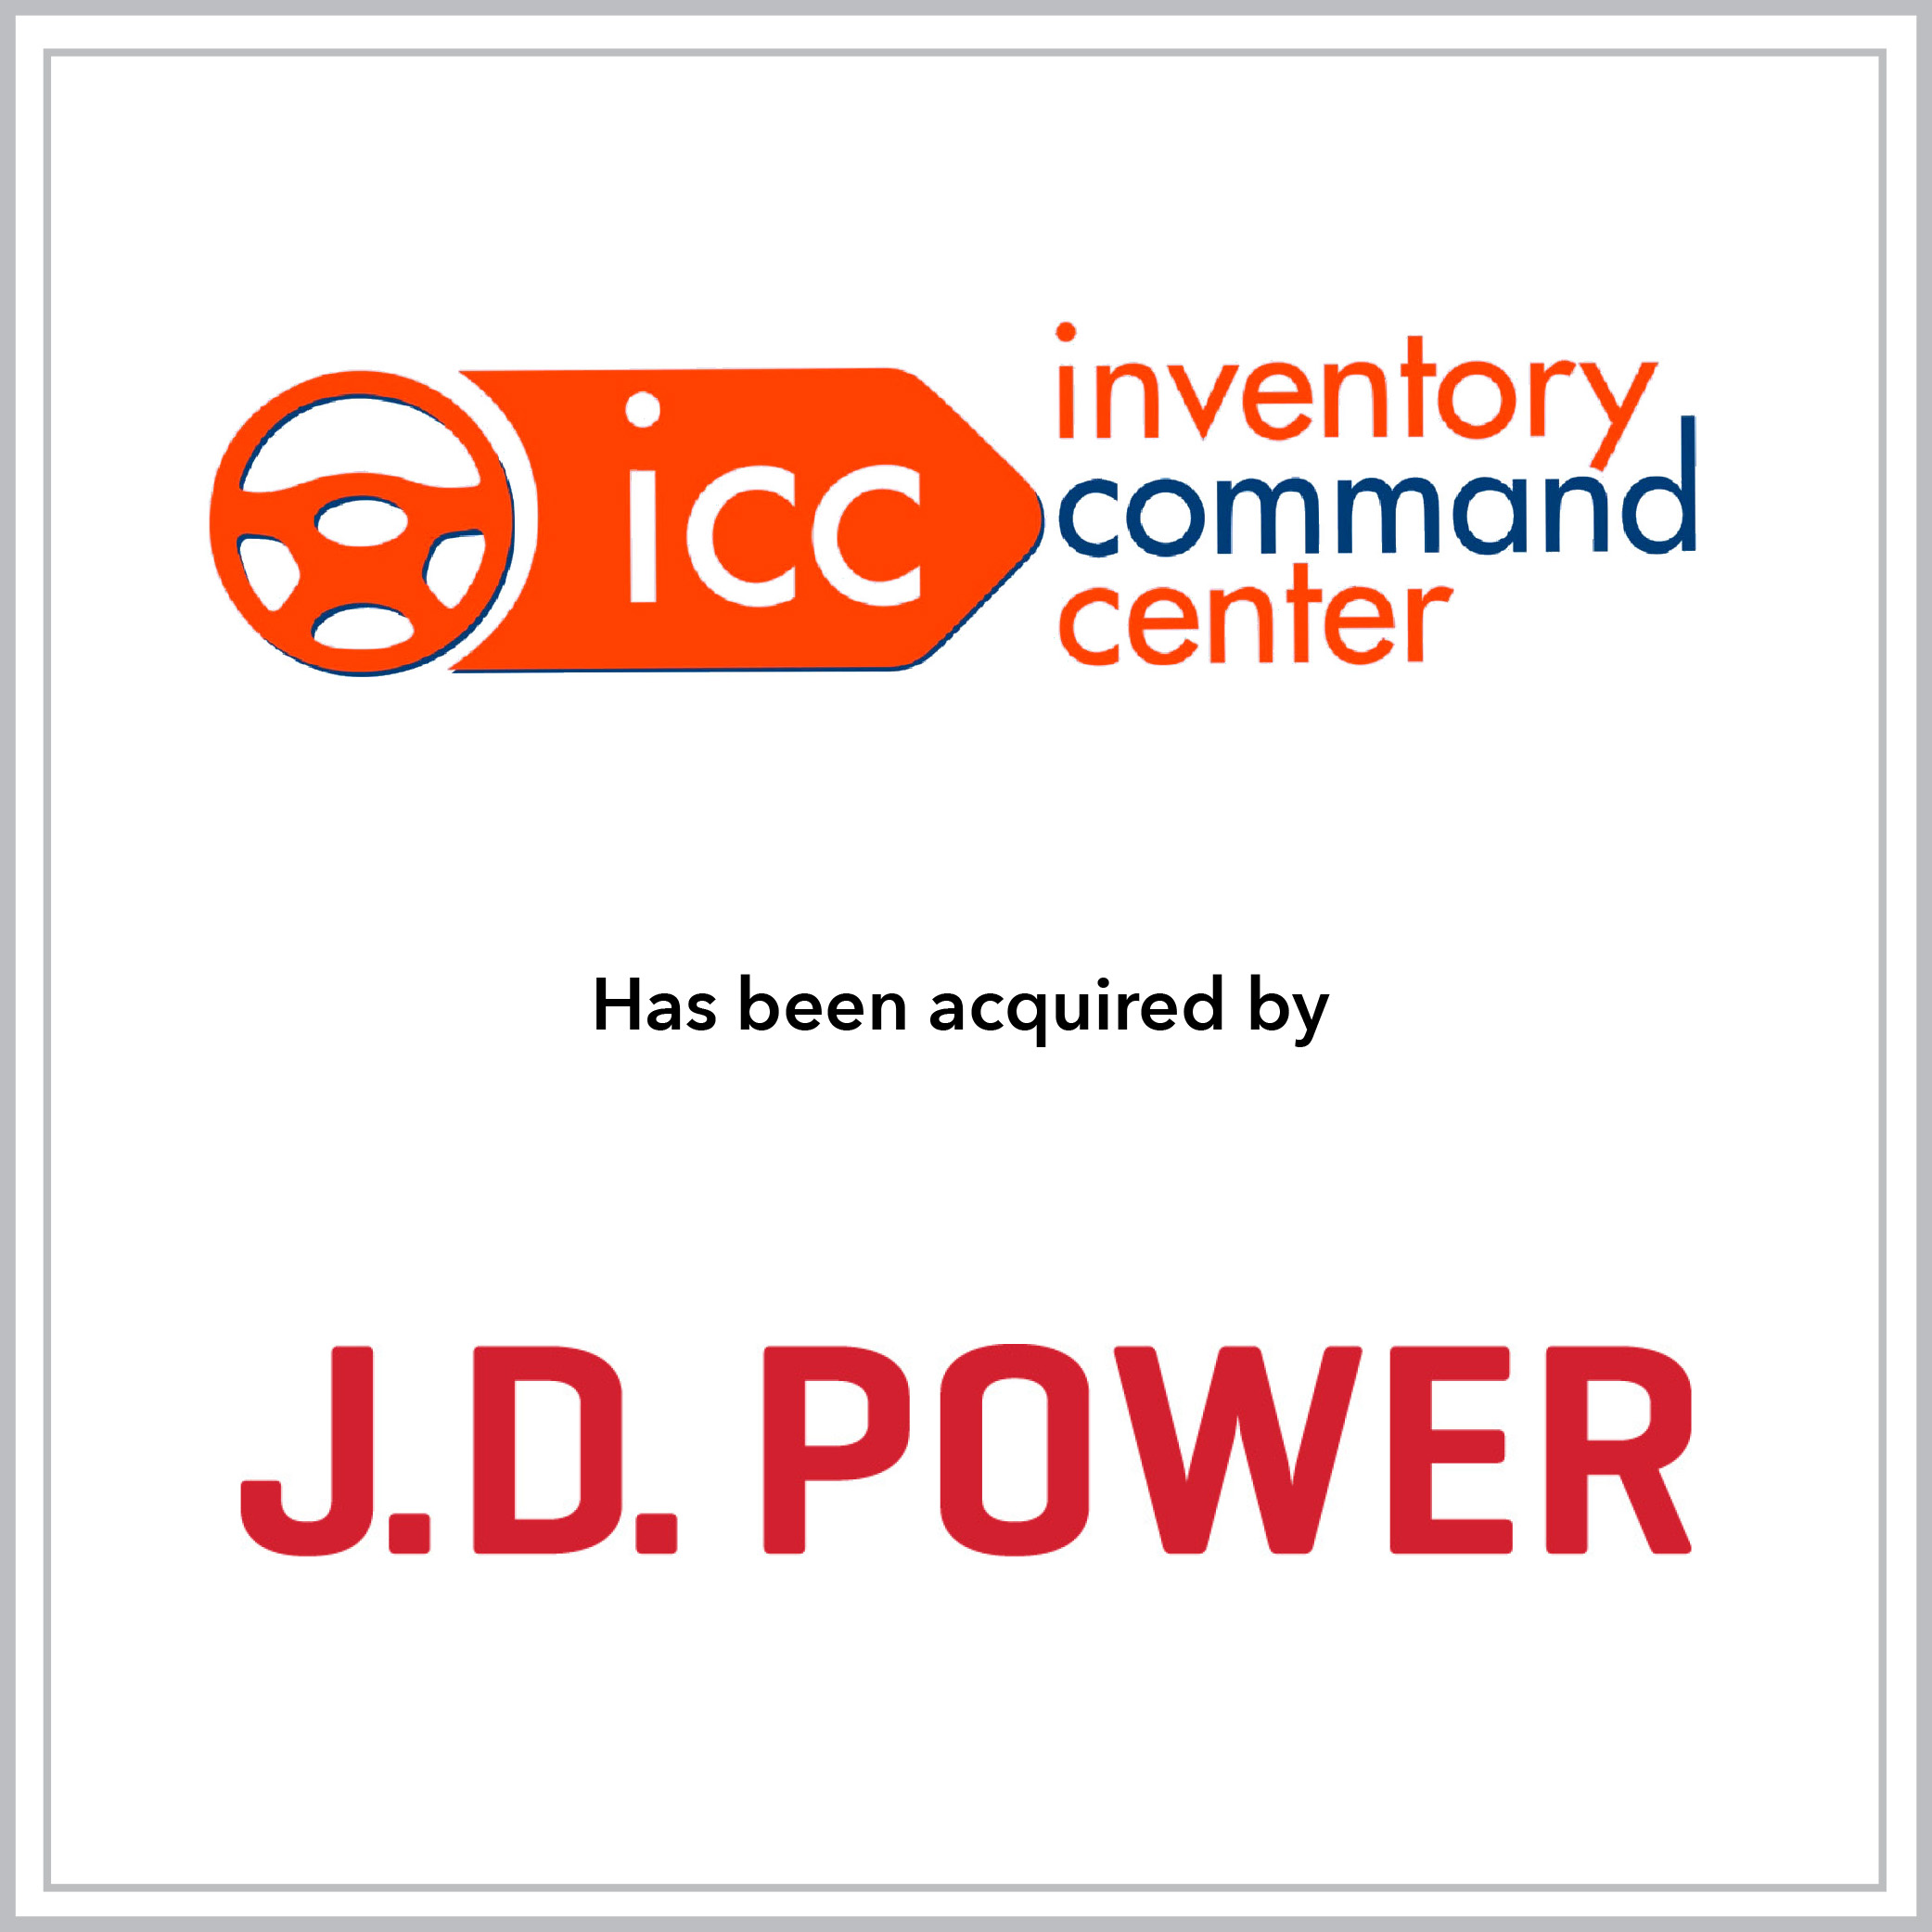 Inventory Command Center has been acquired by J.D. Power